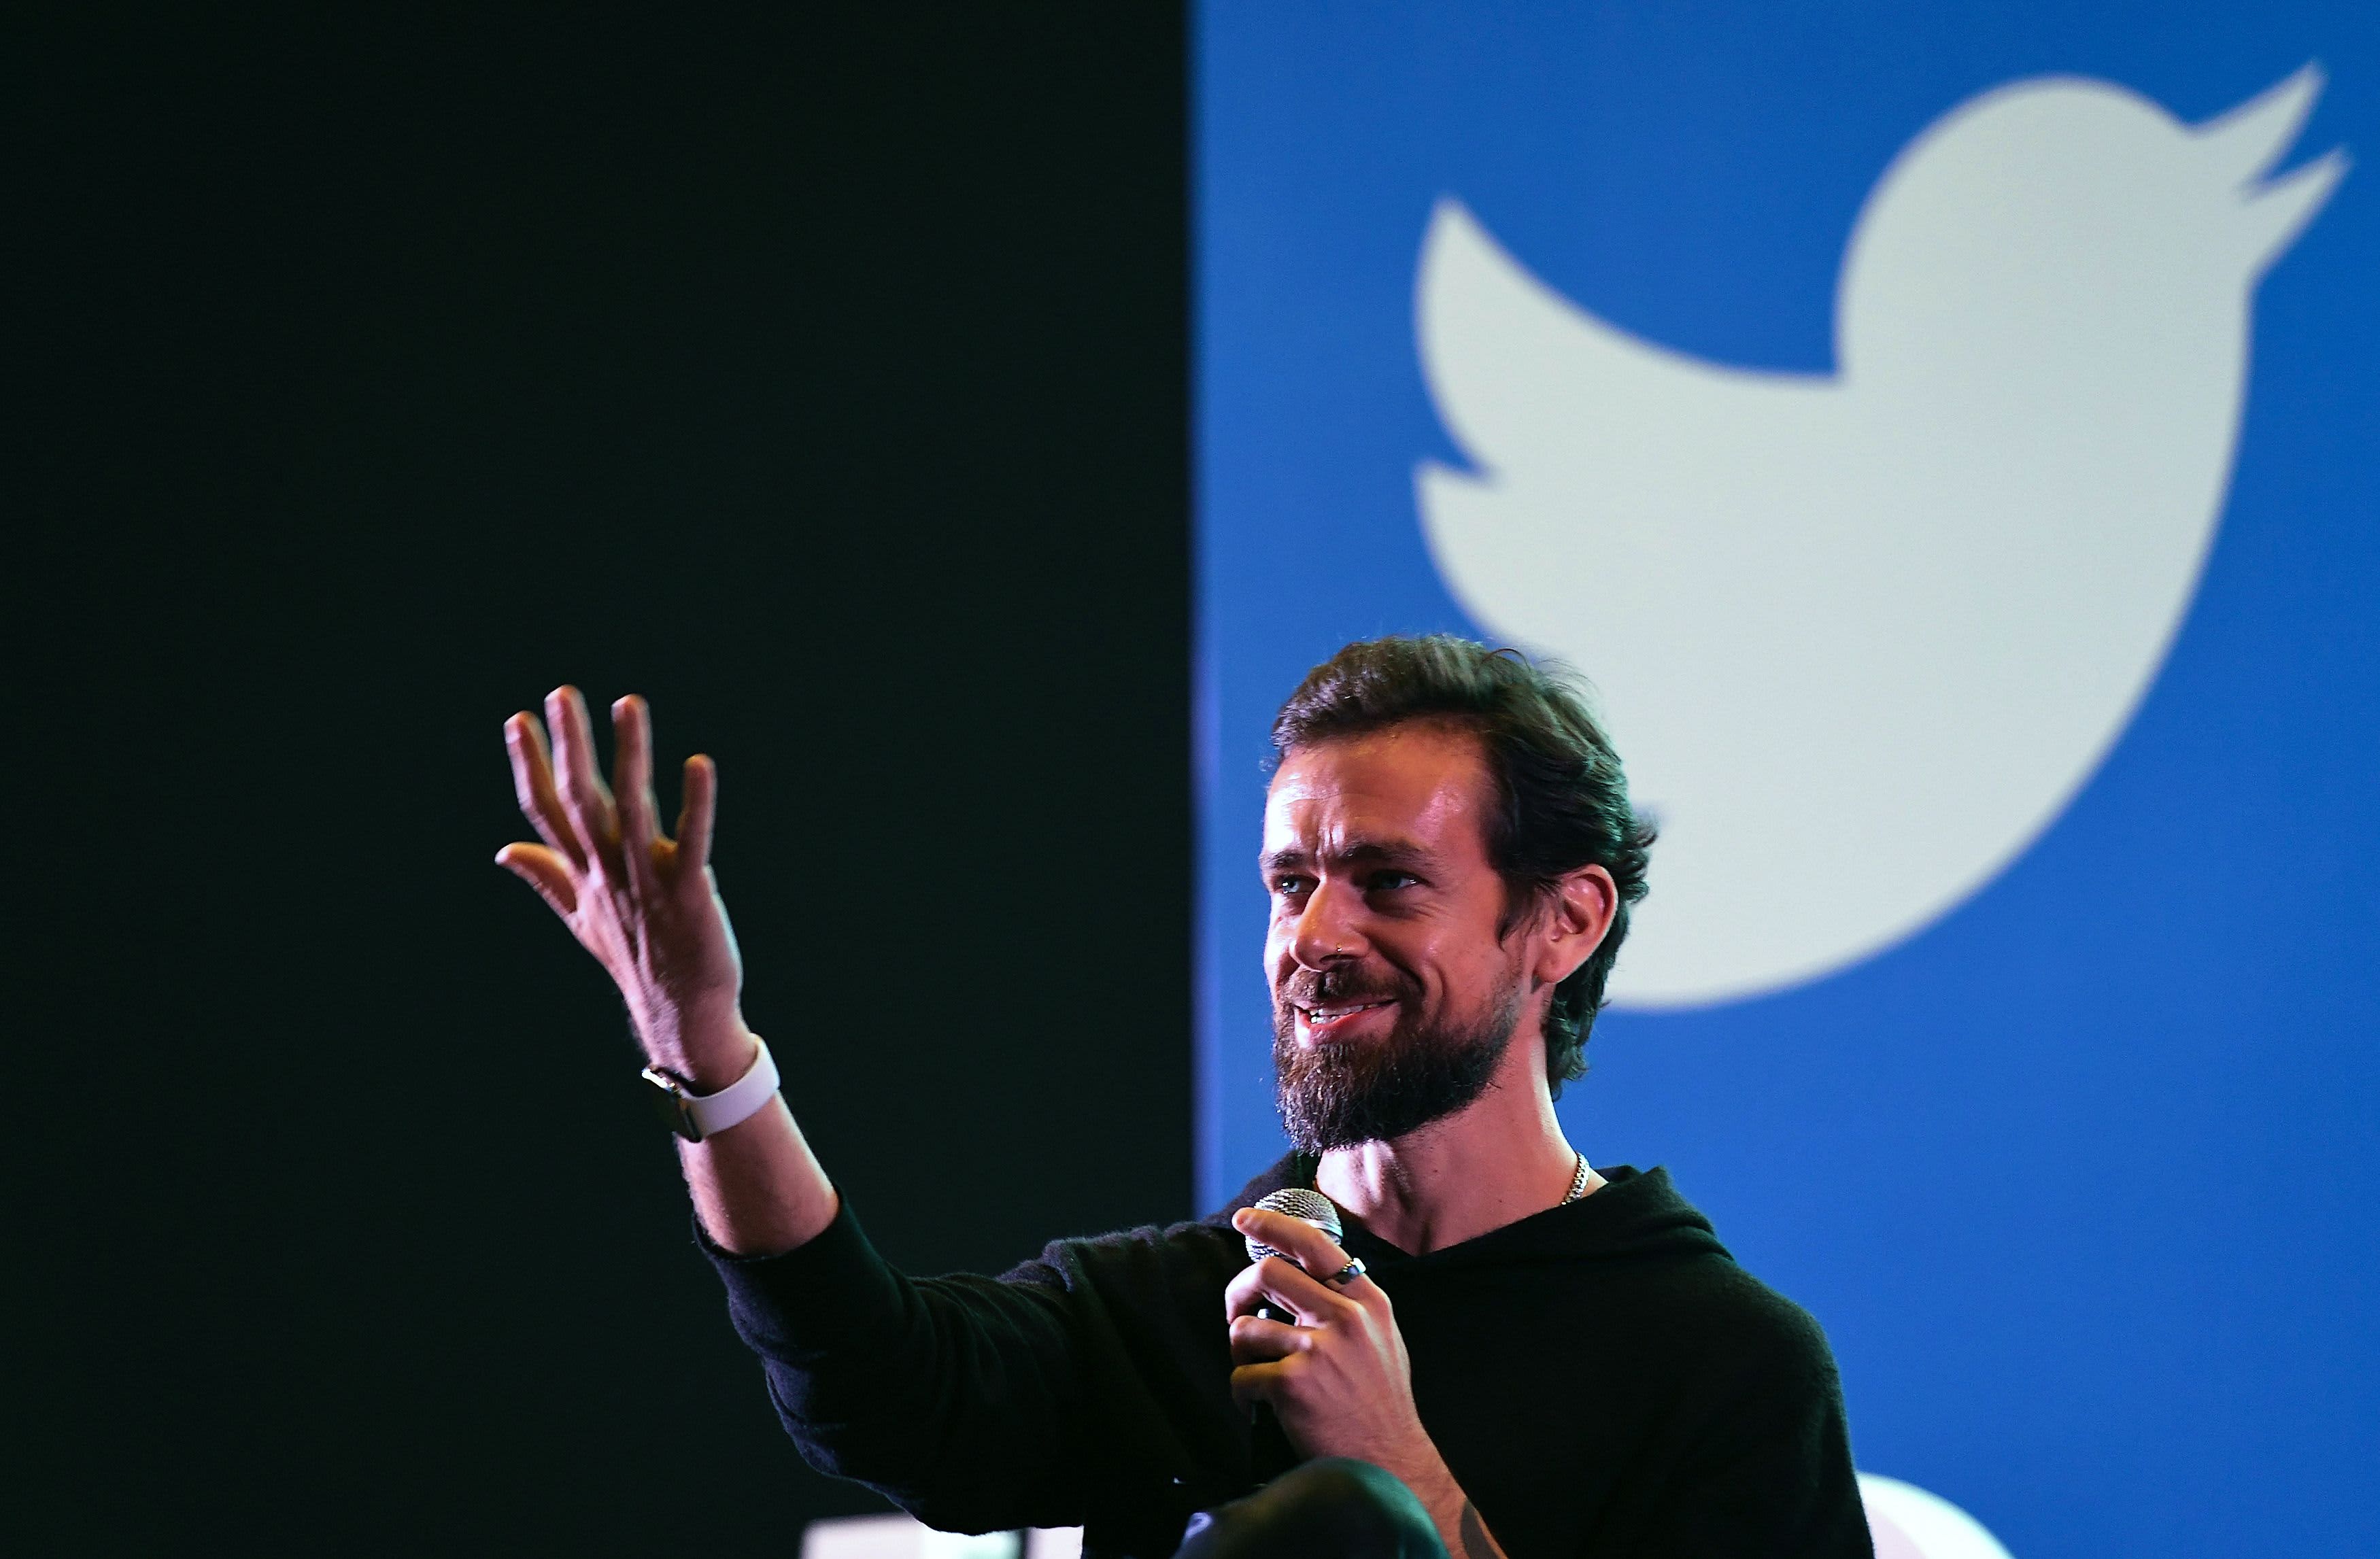 Jack Dorsey sells his first ever tweet as NFT for over $ 2.9 million